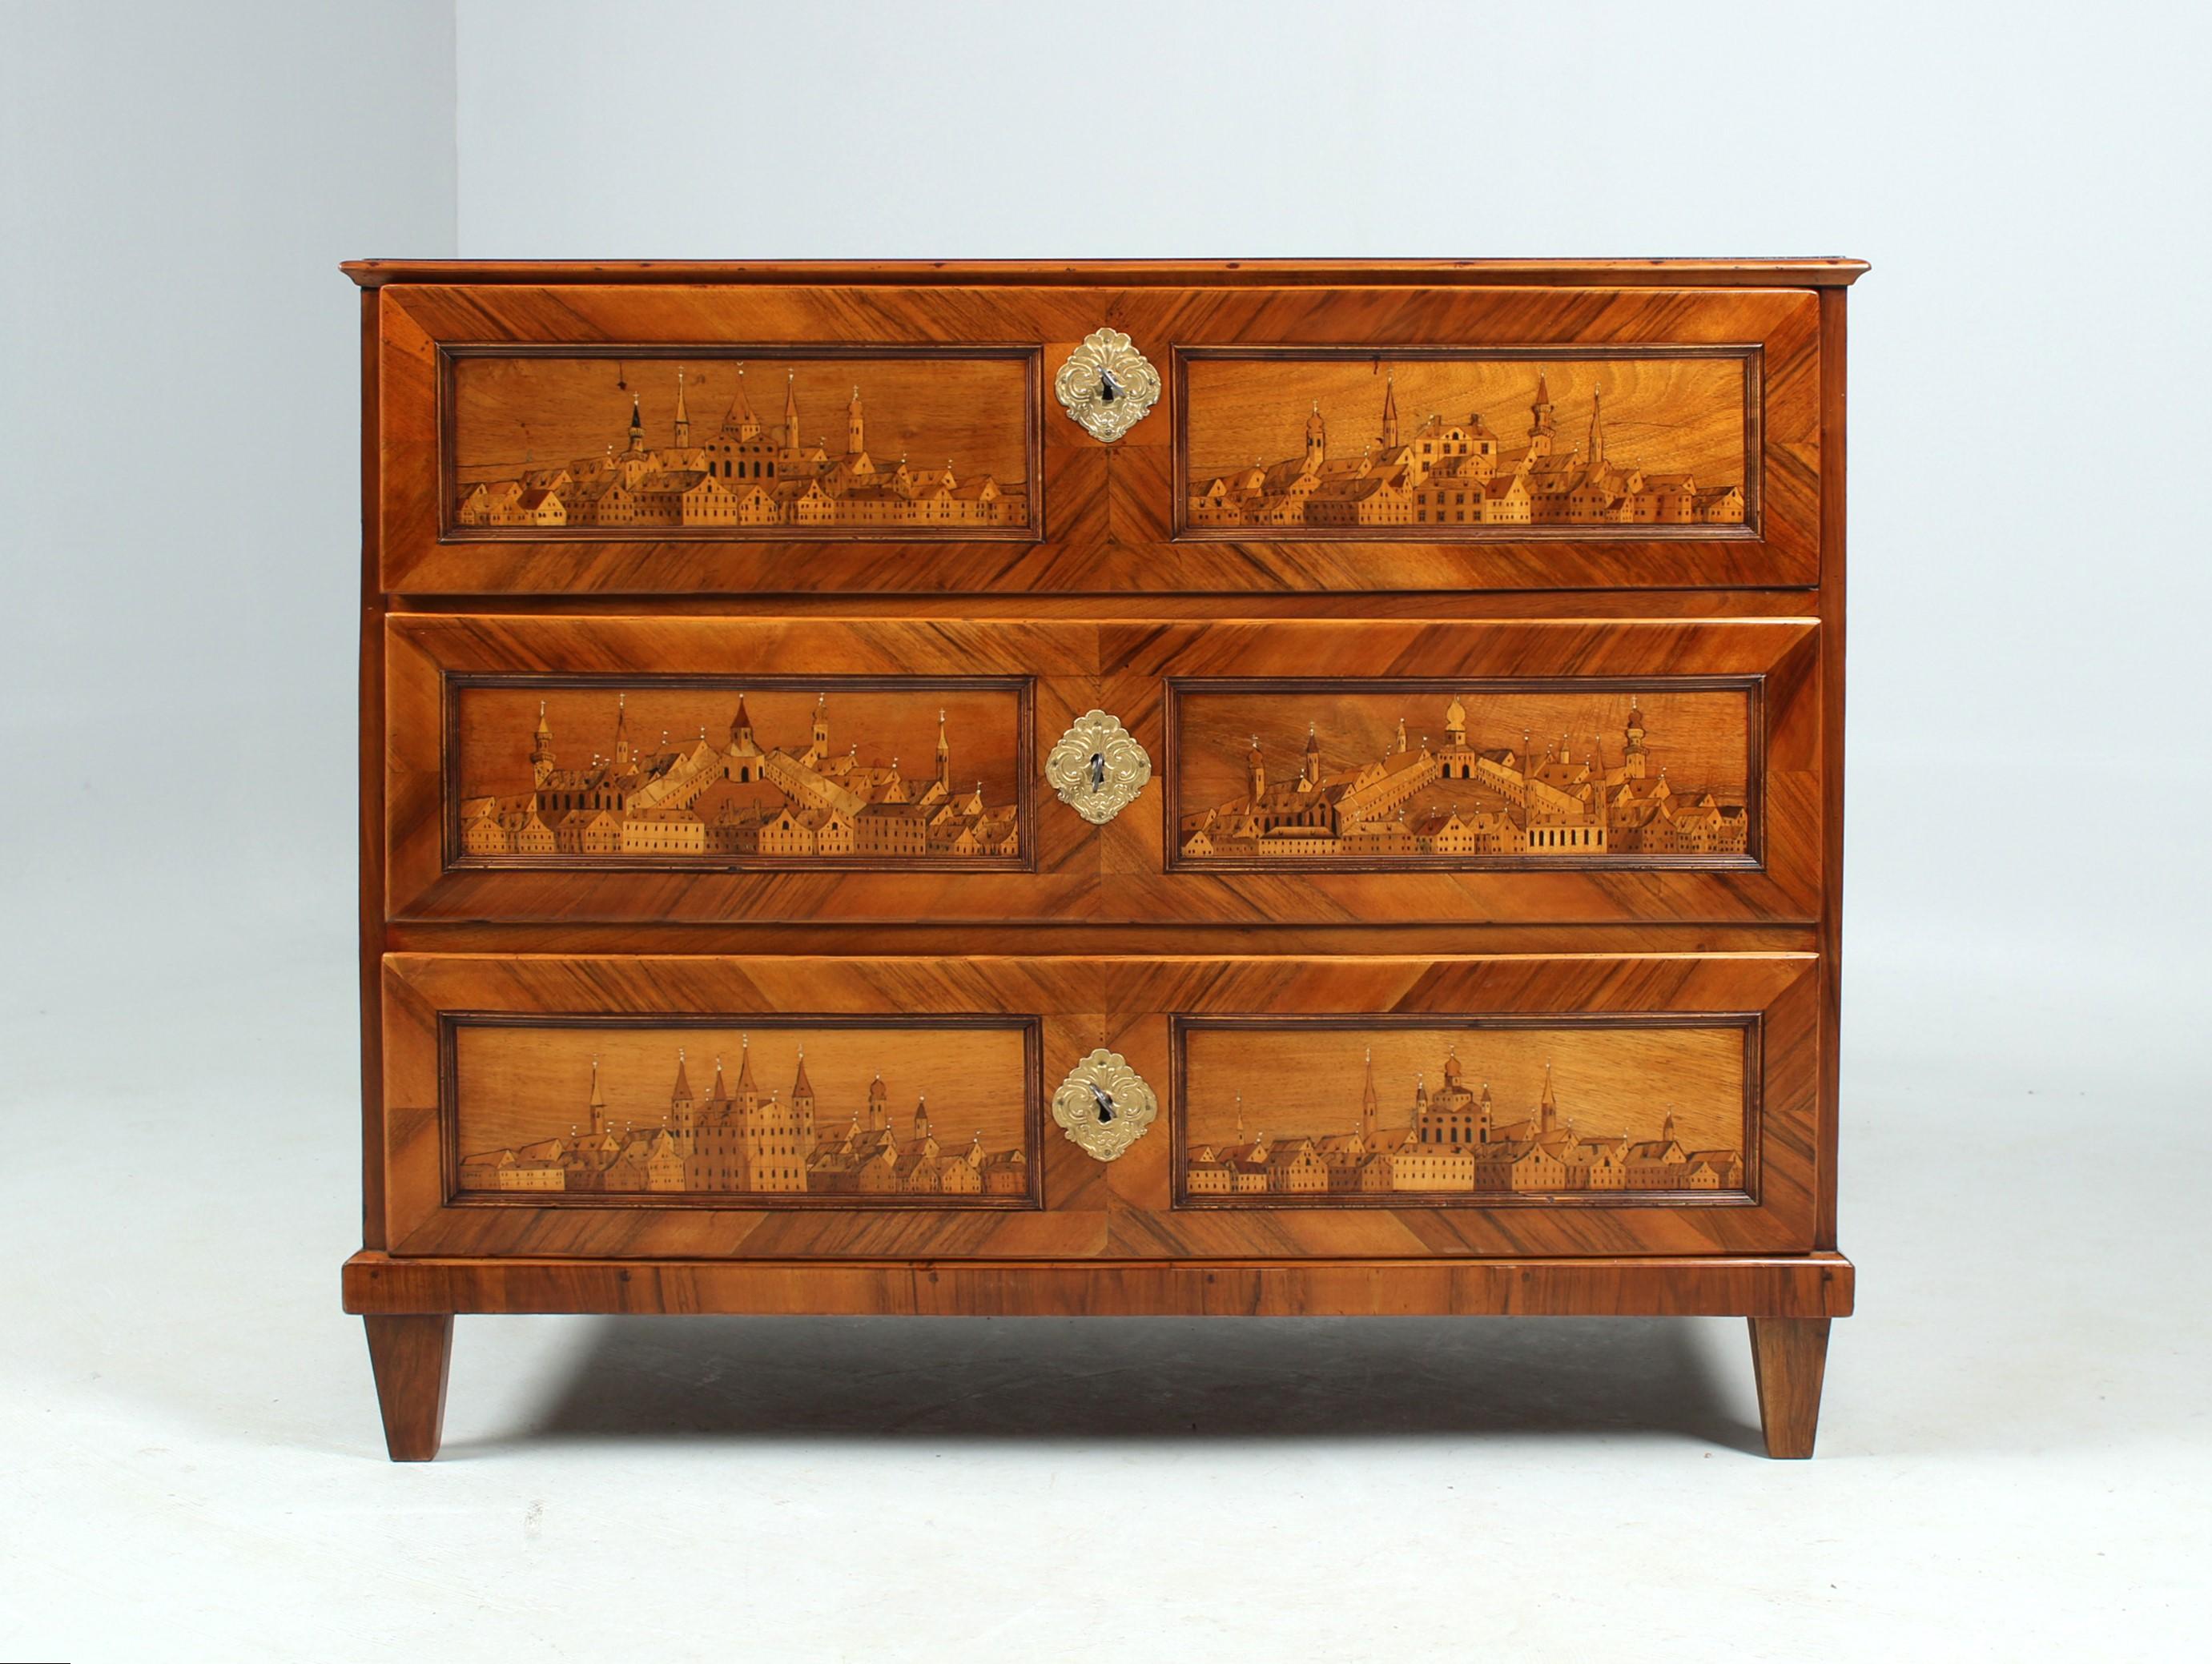 Antique chest of drawers with architectural marquetry

North Italy
Walnut, maple a.o.
Early 19th century.

Dimensions: H x W x D: 90 x 109 x 55 cm

Description:
Exceptional chest of drawers from Italian classicism, decorated all over with